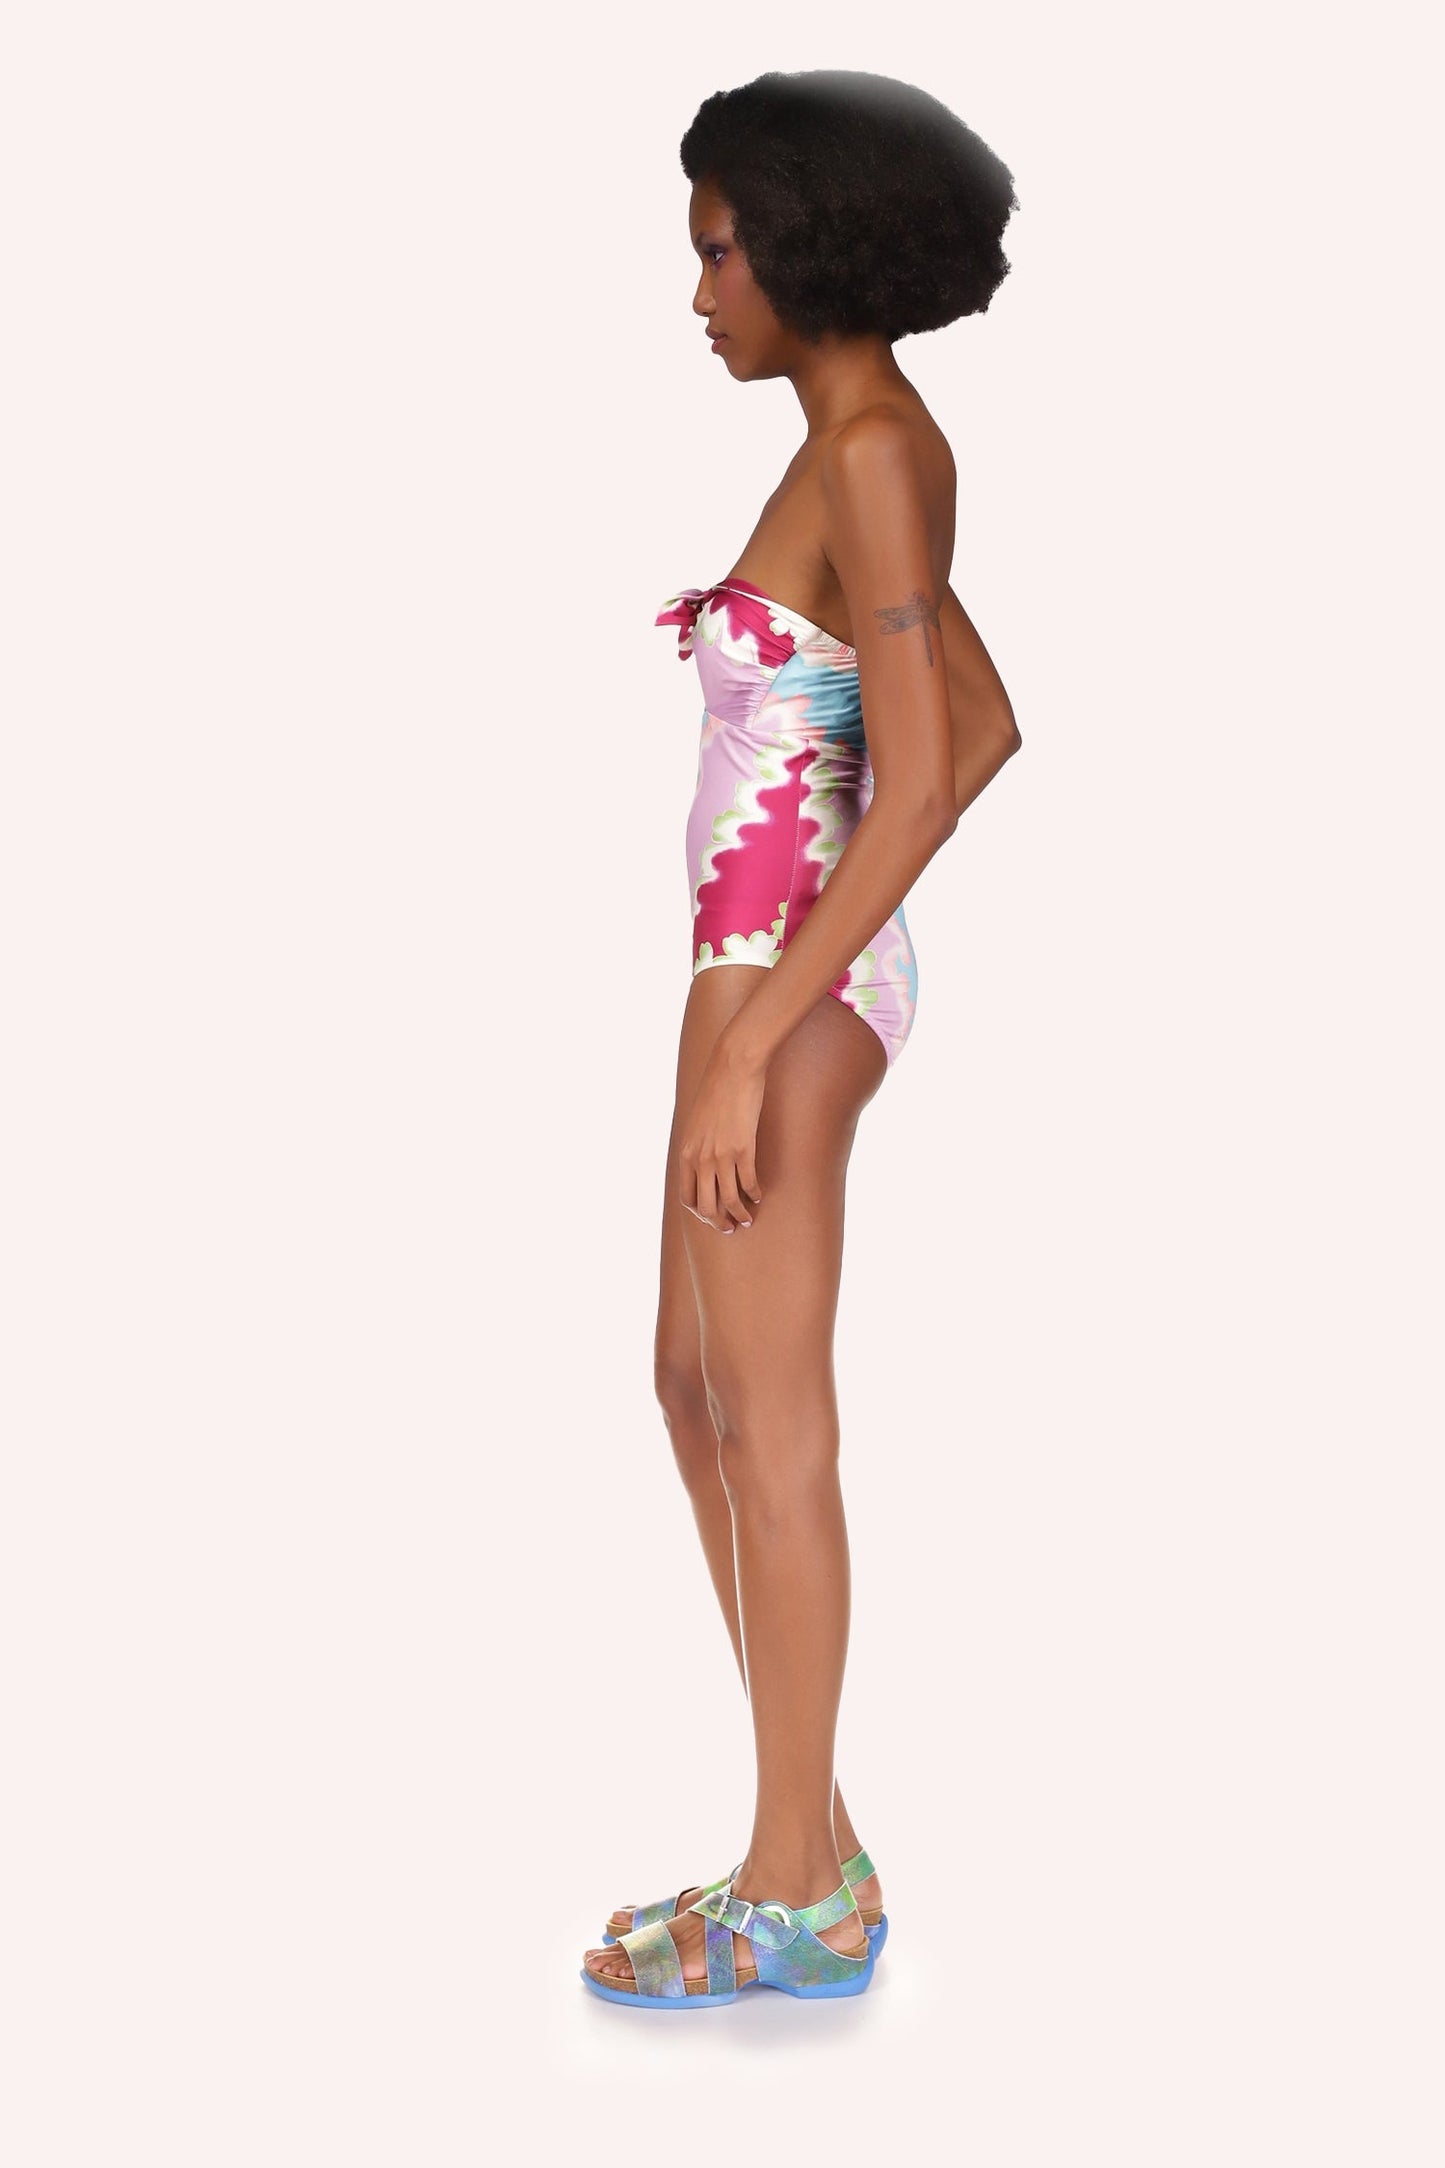 In a stretch fabric, full Bathing Suit wavy lines cloudy design, Feels and fits like a second skin